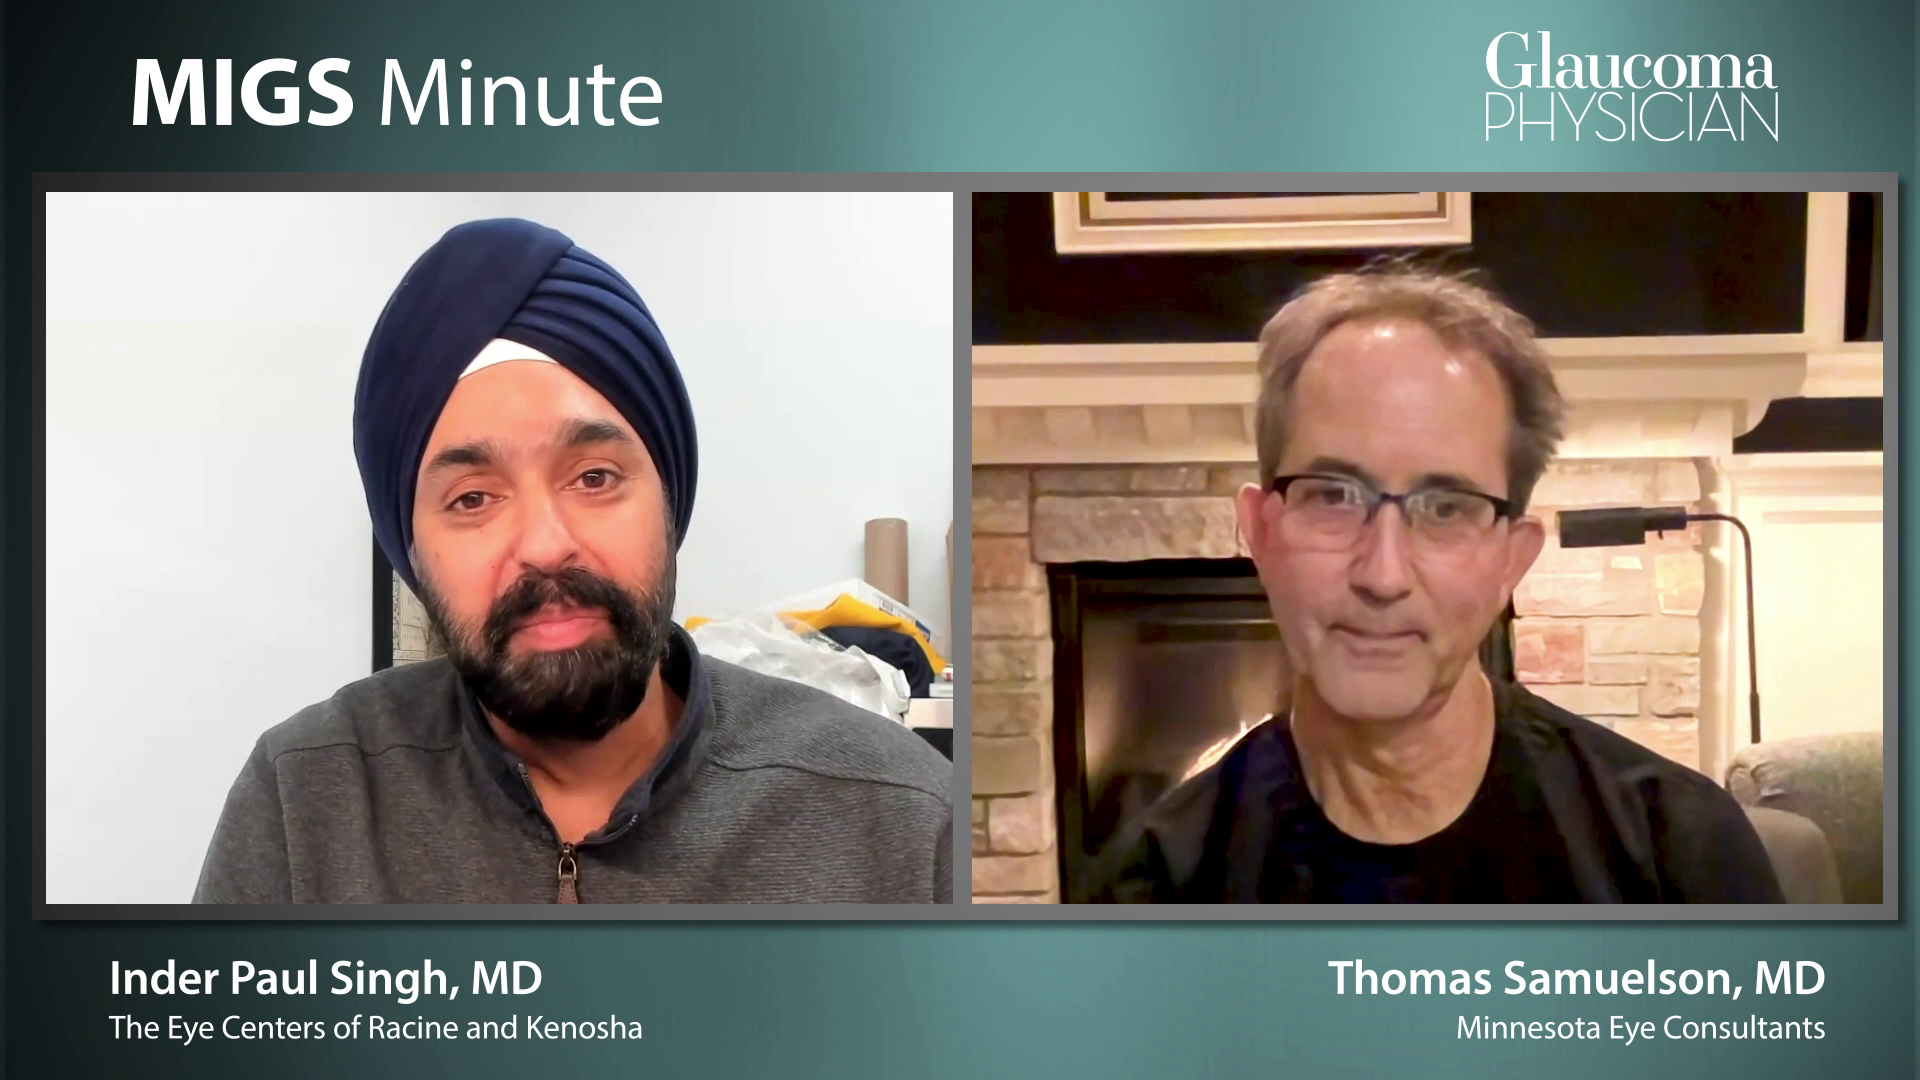 Episode 13: Inder Paul Singh, MD, and Thomas Samuelson, MD, discuss glaucoma management and interventional options.